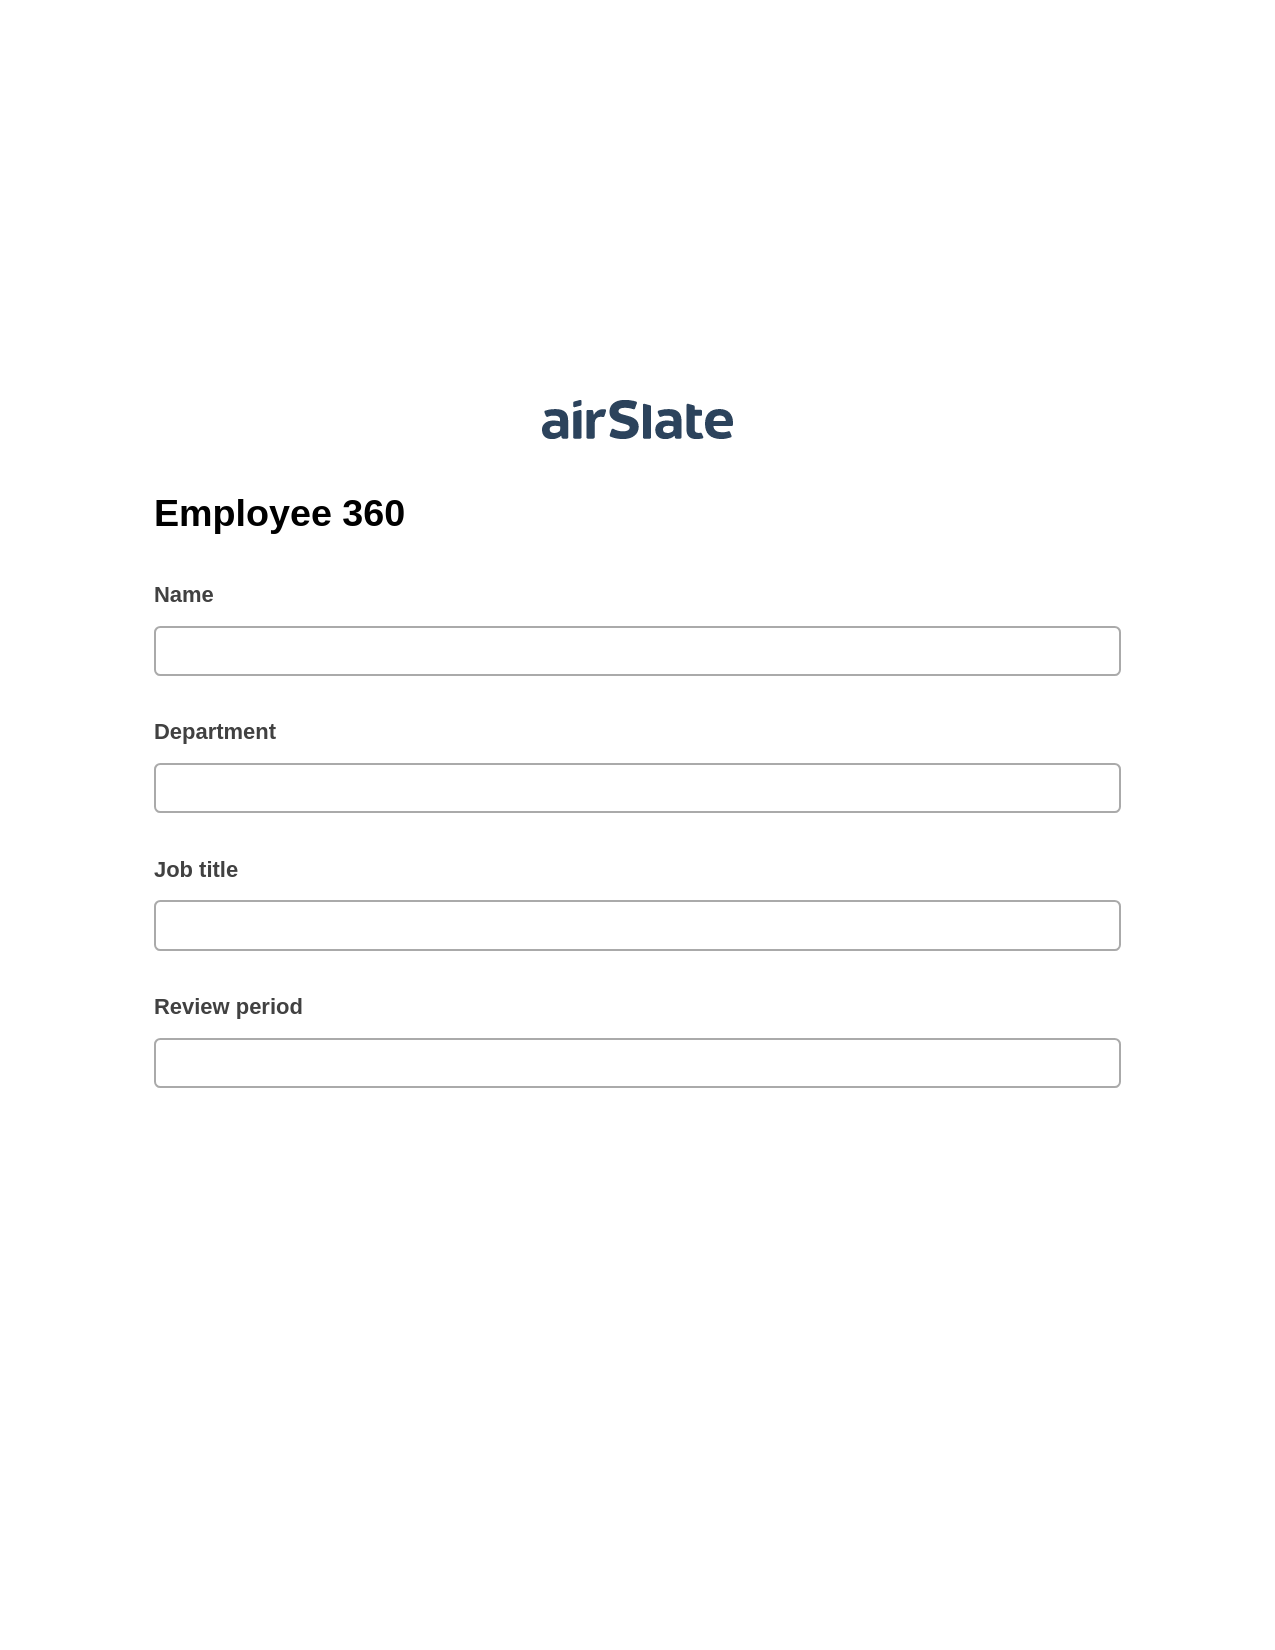 Multirole Employee 360 Pre-fill from MySQL Bot, Create slate from another Flow Bot, Export to Smartsheet